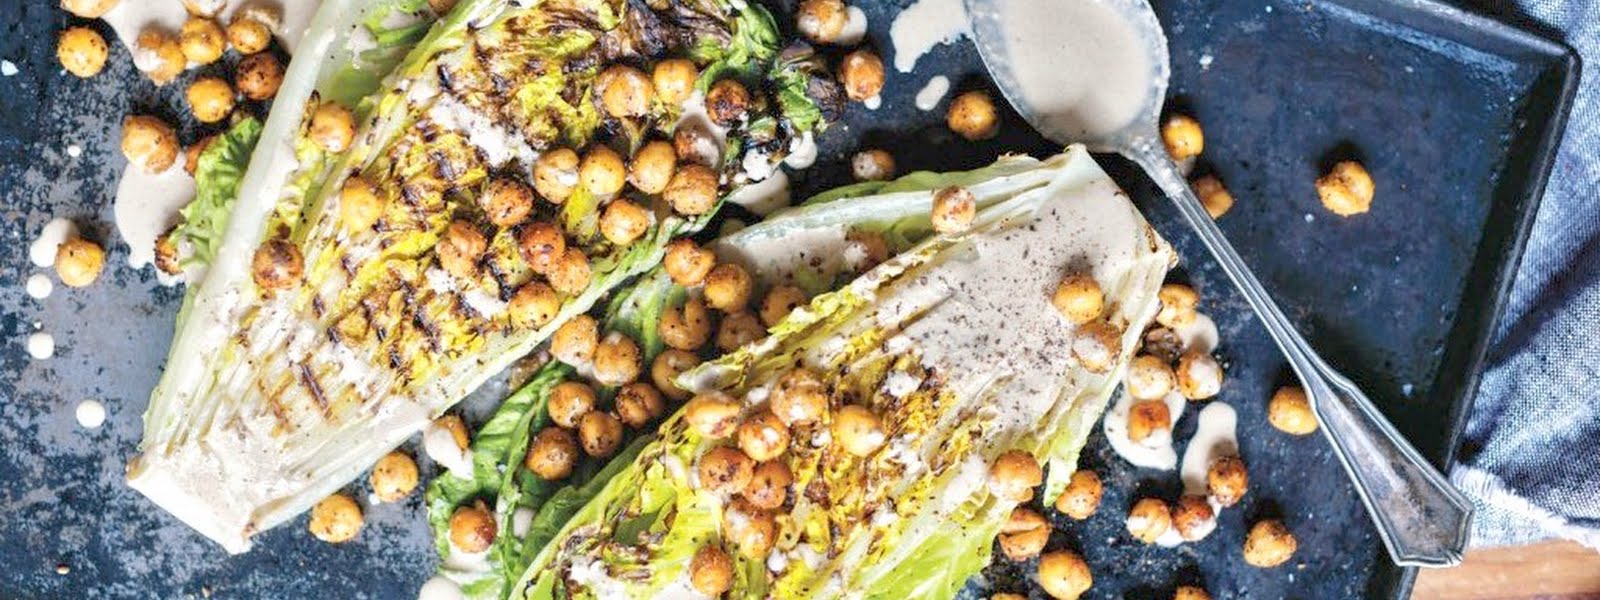 Supper Club: Grilled Caesar salad with chickpea croutons